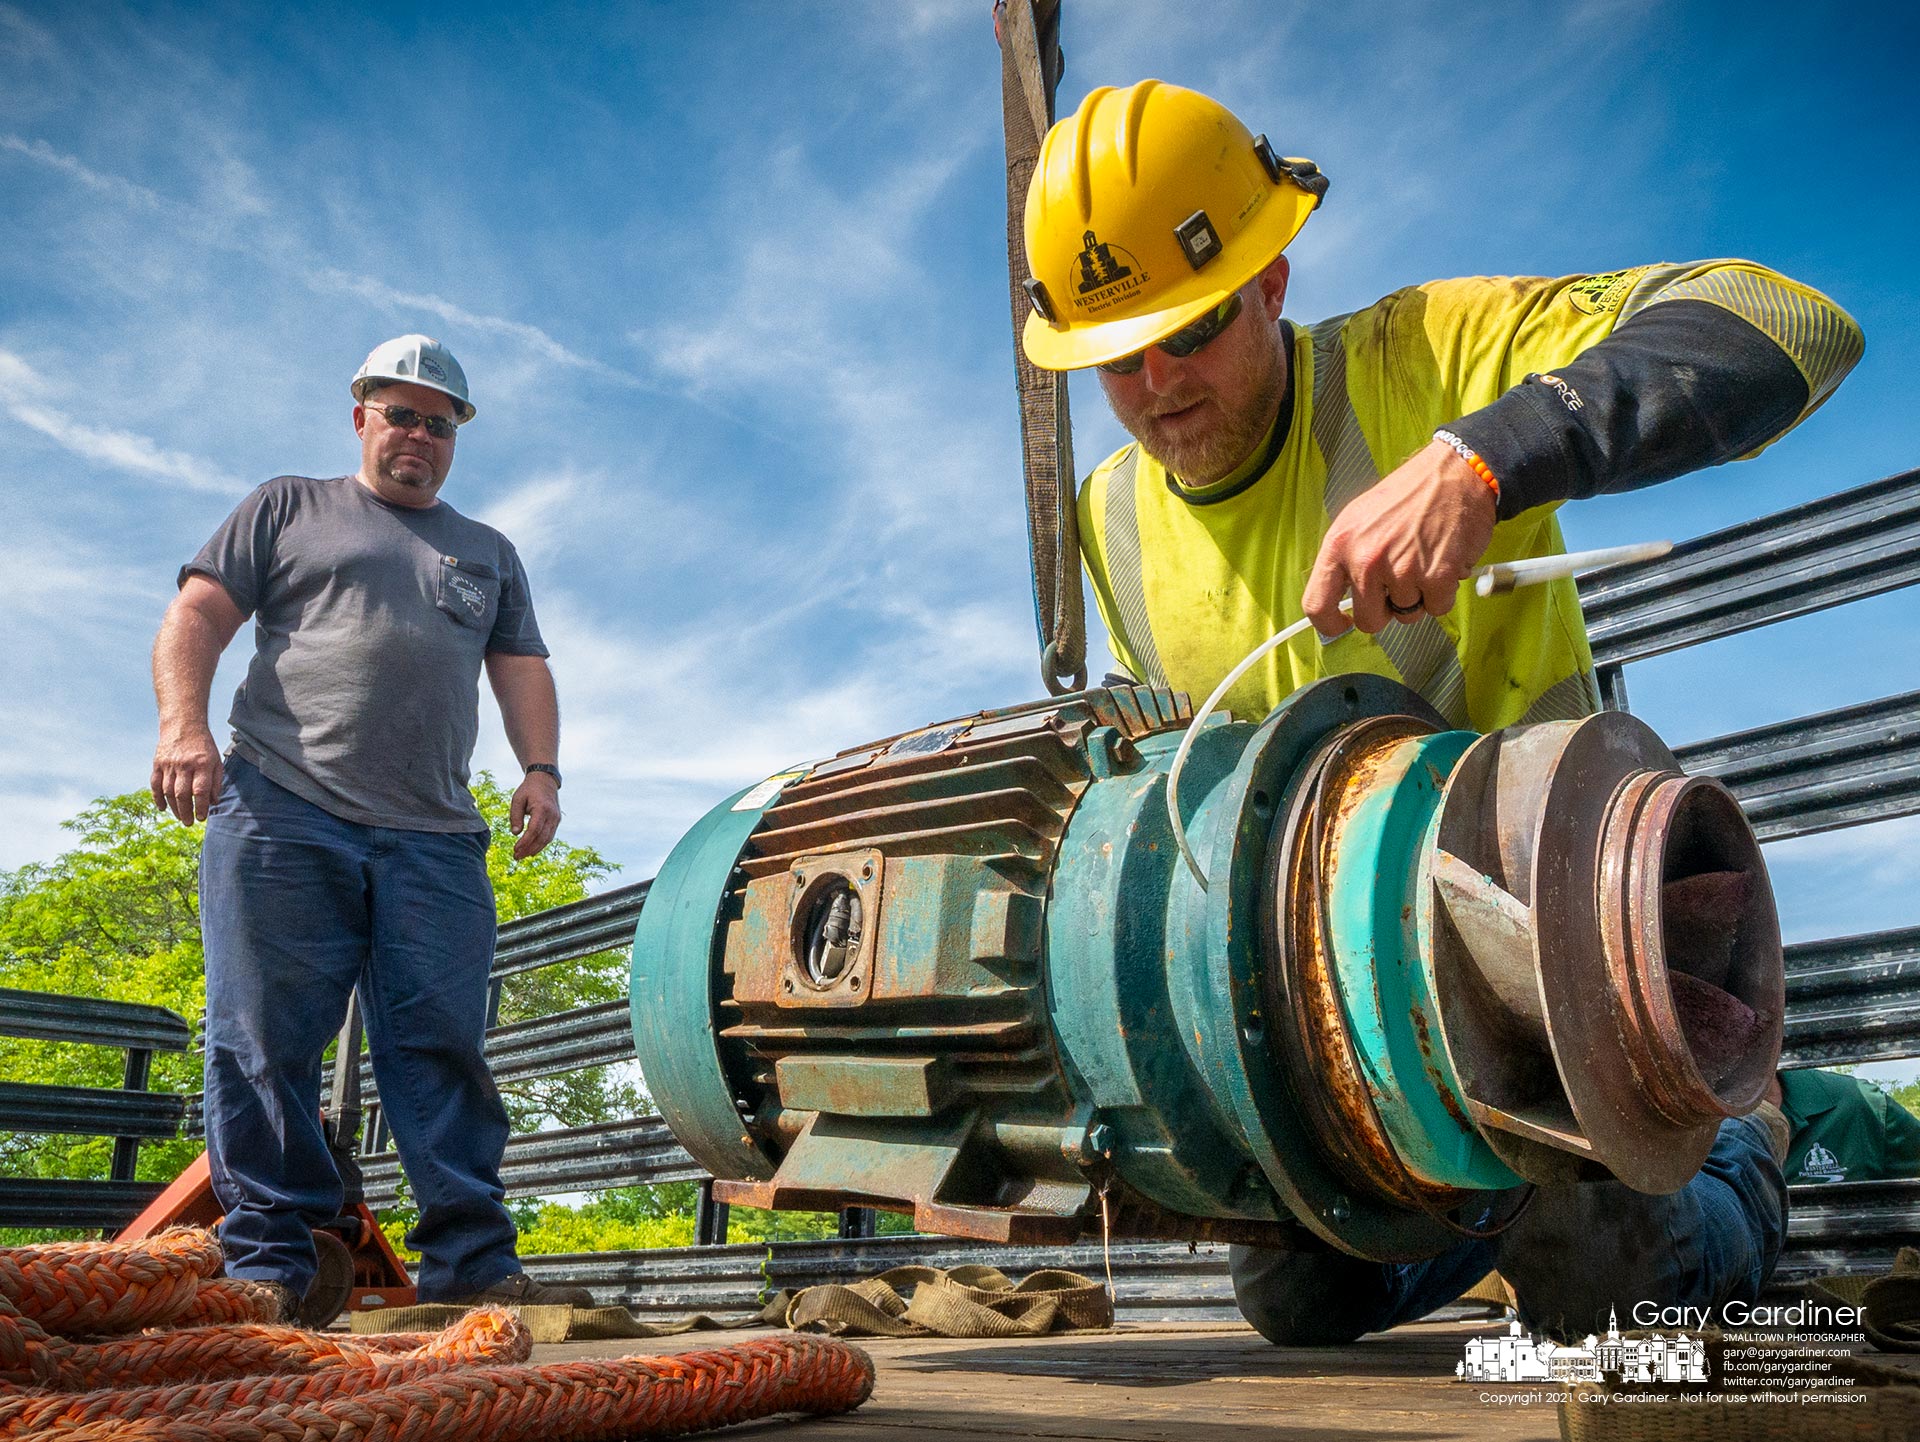 A city electric worker helps remove the broken impeller pump that provides water flow in The River at Highlands Pool when its bearings failed during testing for the pool's opening next weekend. My Final Photo for May 21, 2021.